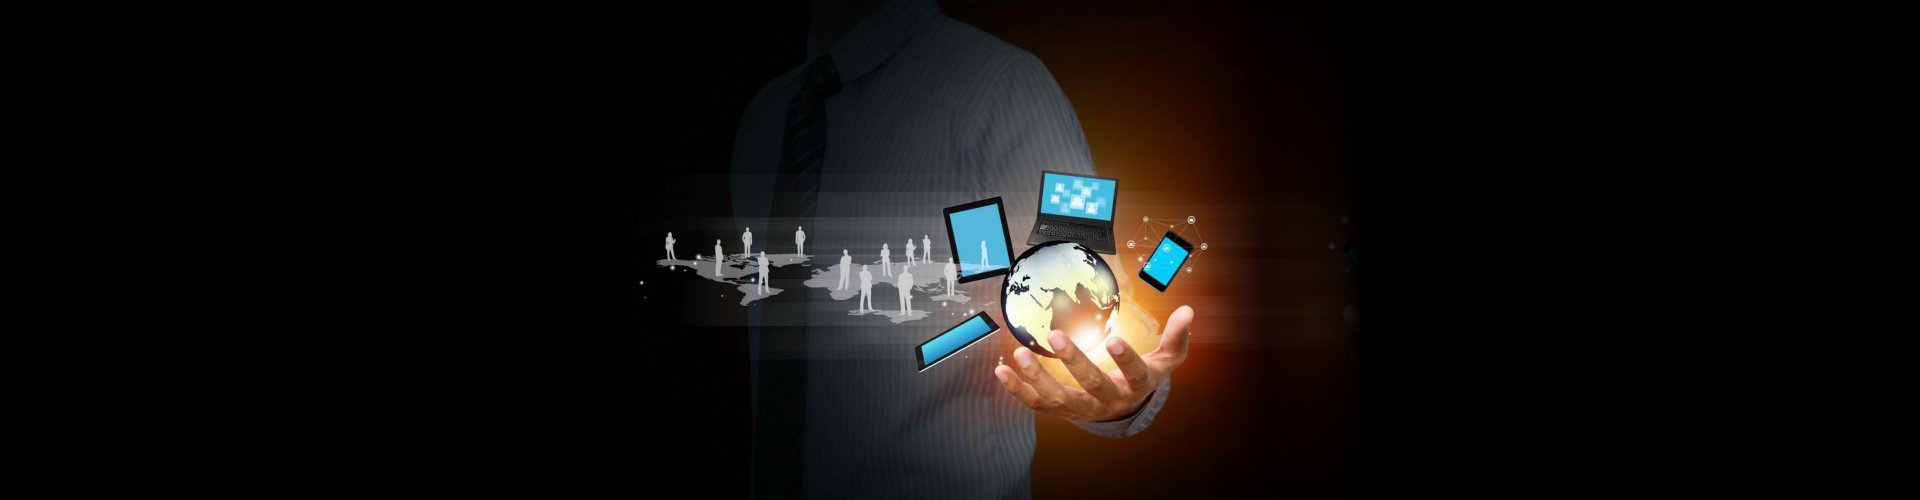 information technology concept image